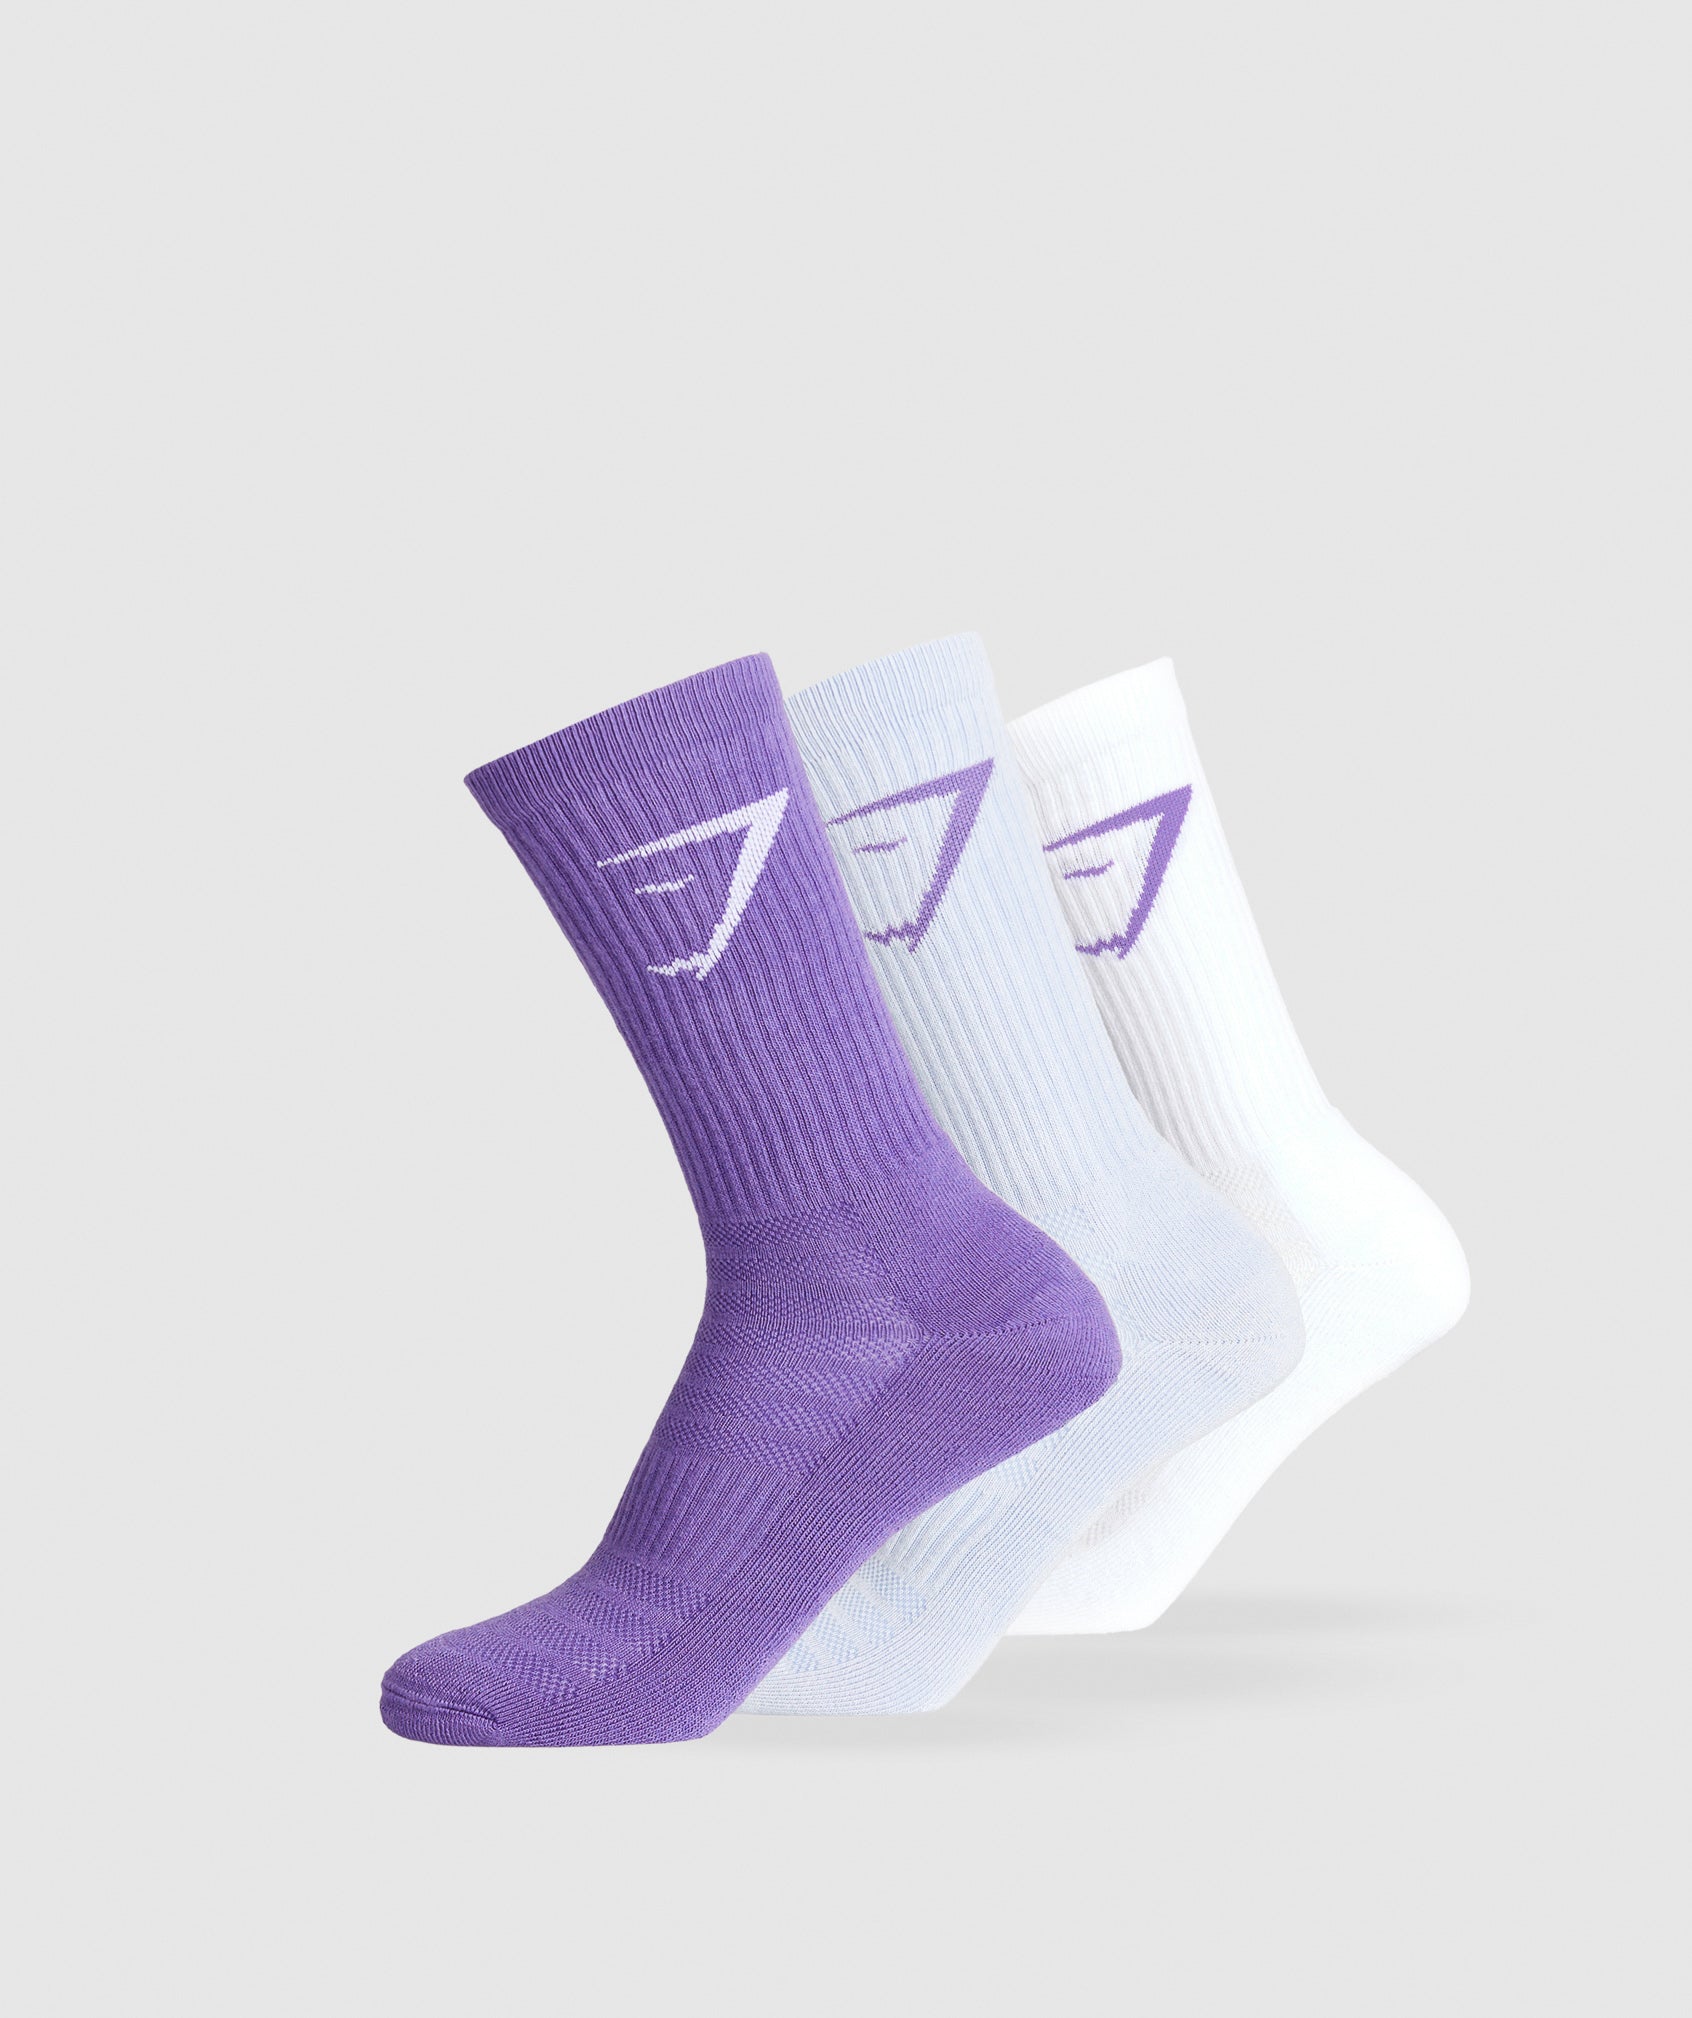 Crew Socks 3pk in Stellar Purple/Silver Lilac/White is out of stock